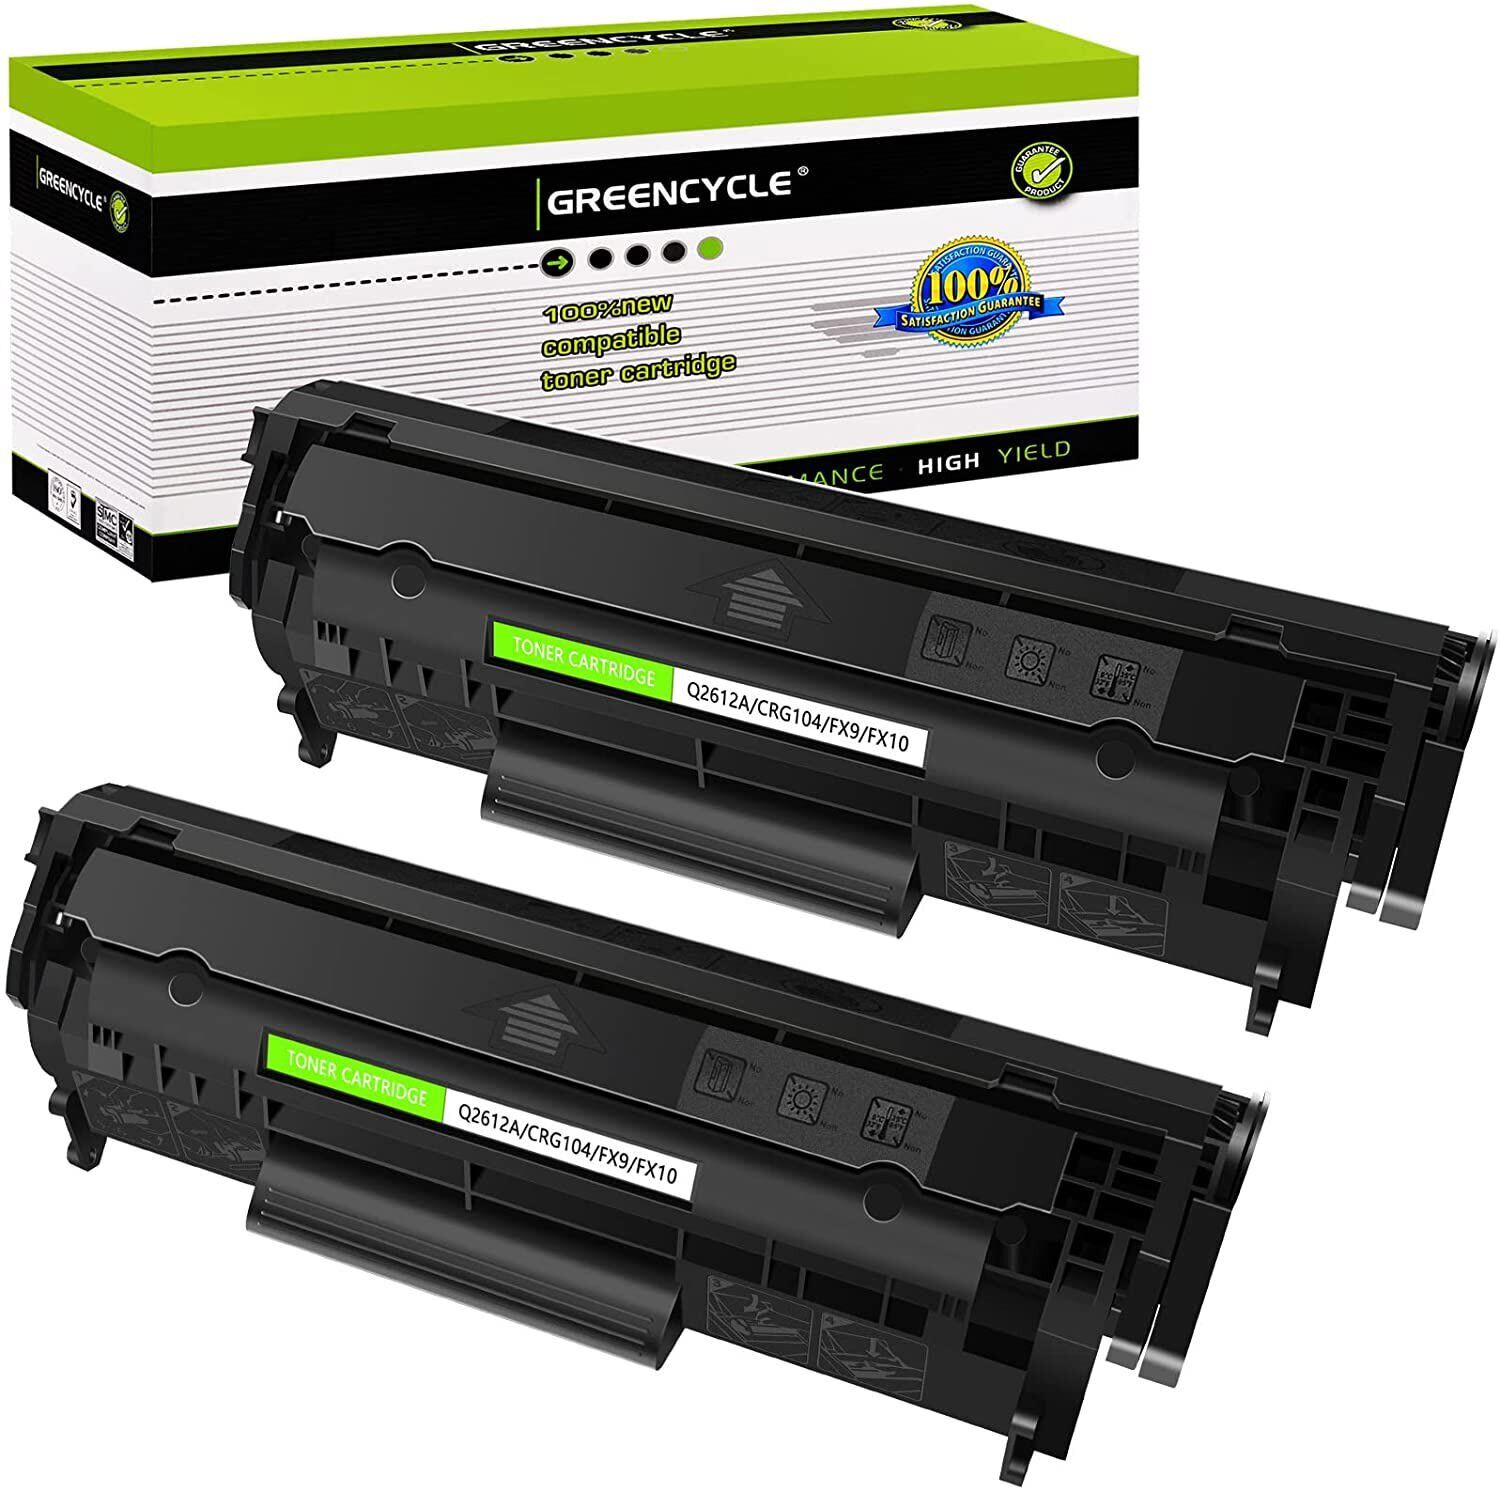 GREENCYCLE 2PK Q2612A 12A Toner Cartridge Compatible with HP LaserJet 1018 1022n